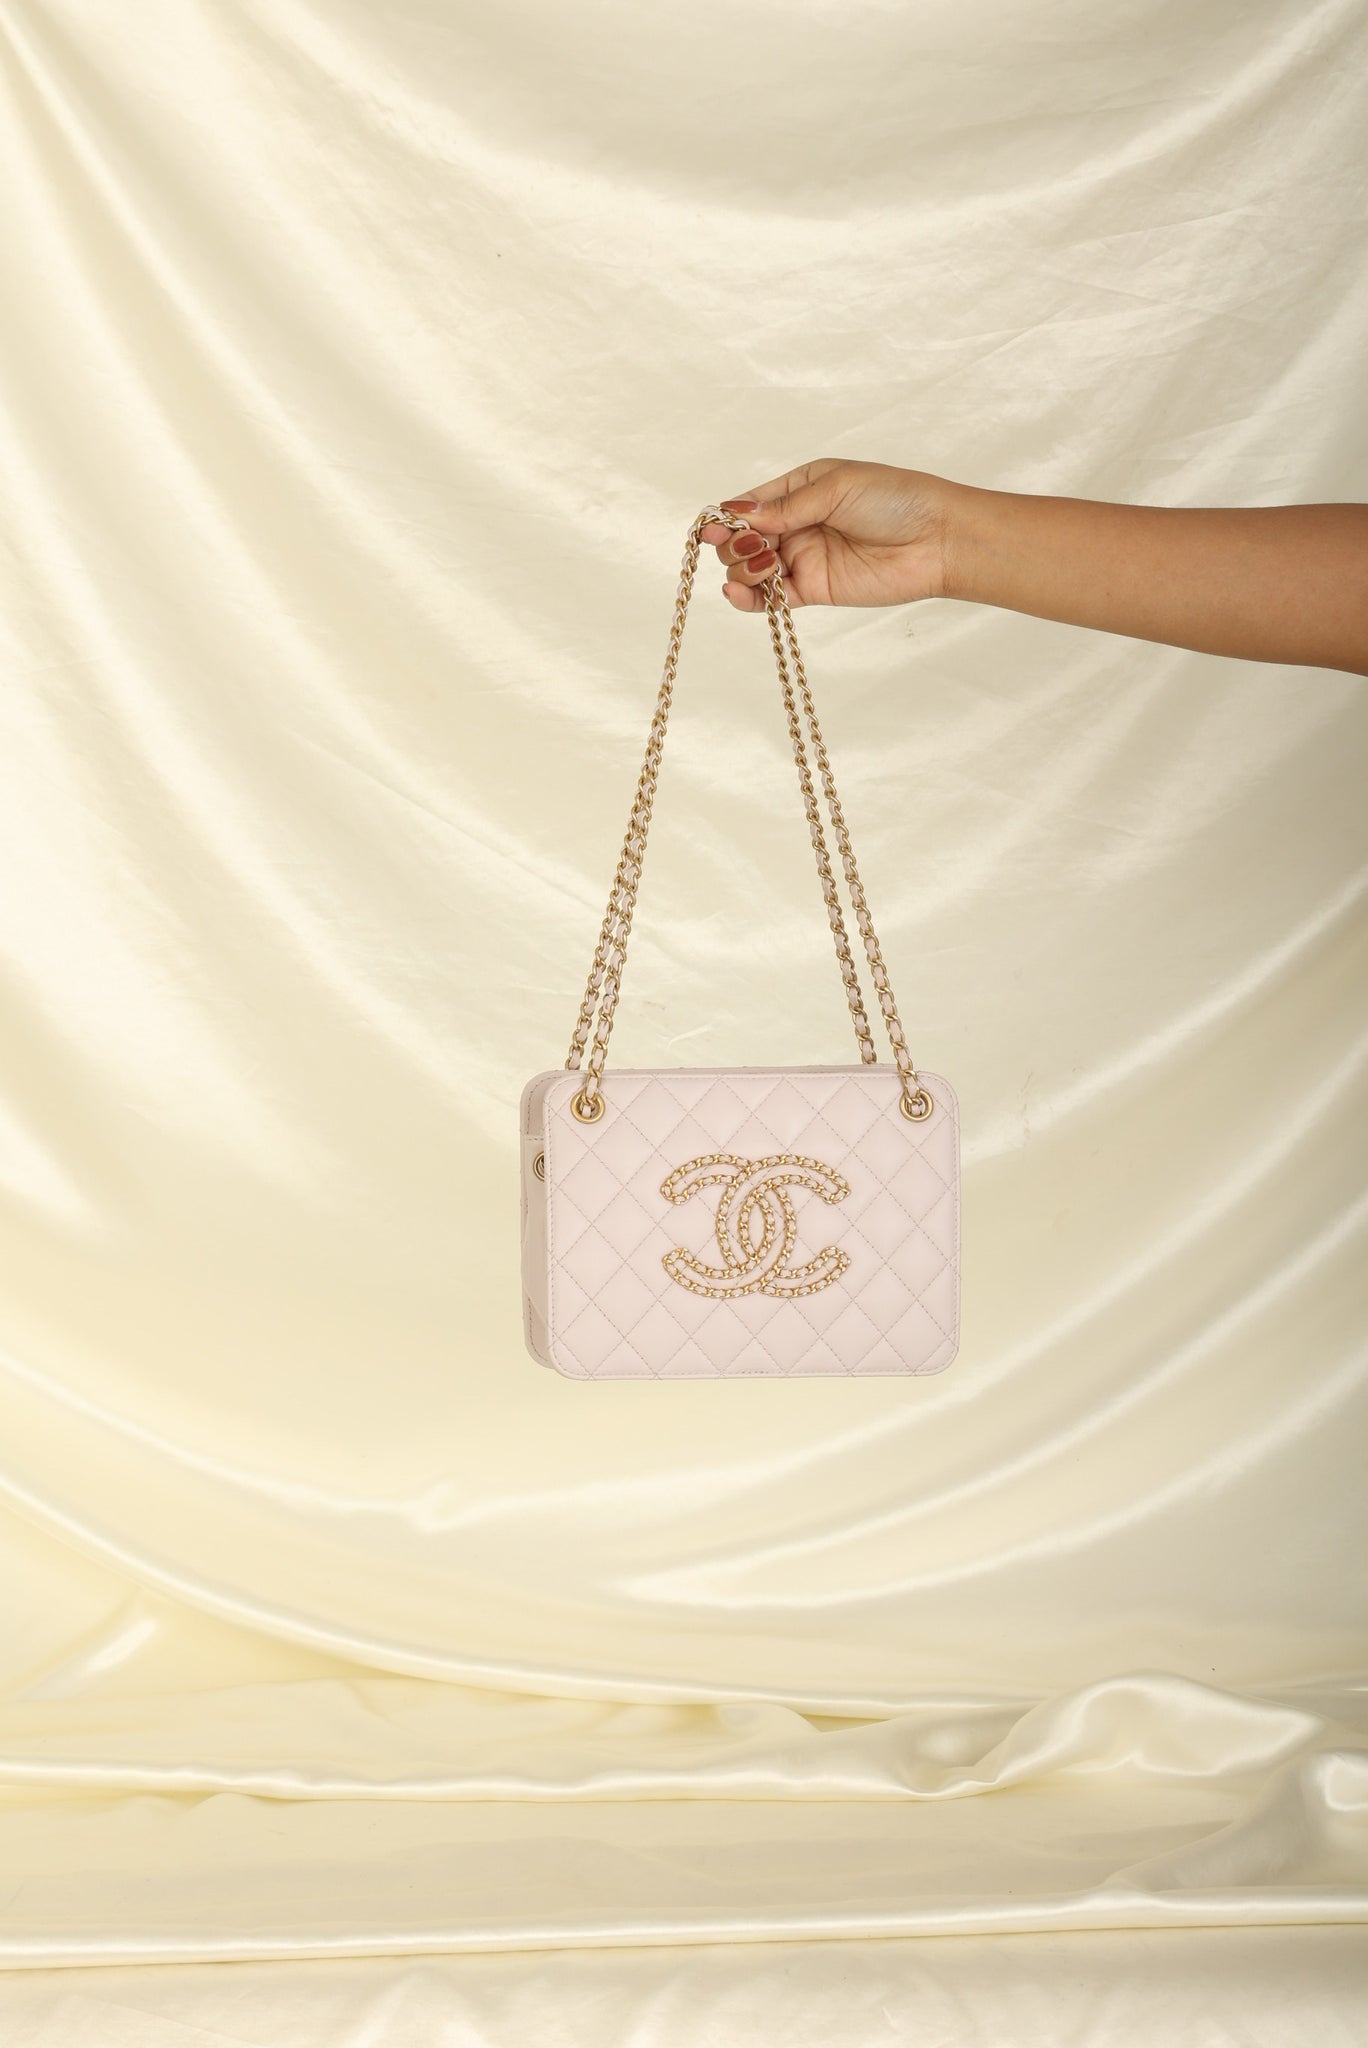 Pre-owned Chanel Beaute Vip Gift Big Ivory White Tote Shopper Bag Boxed